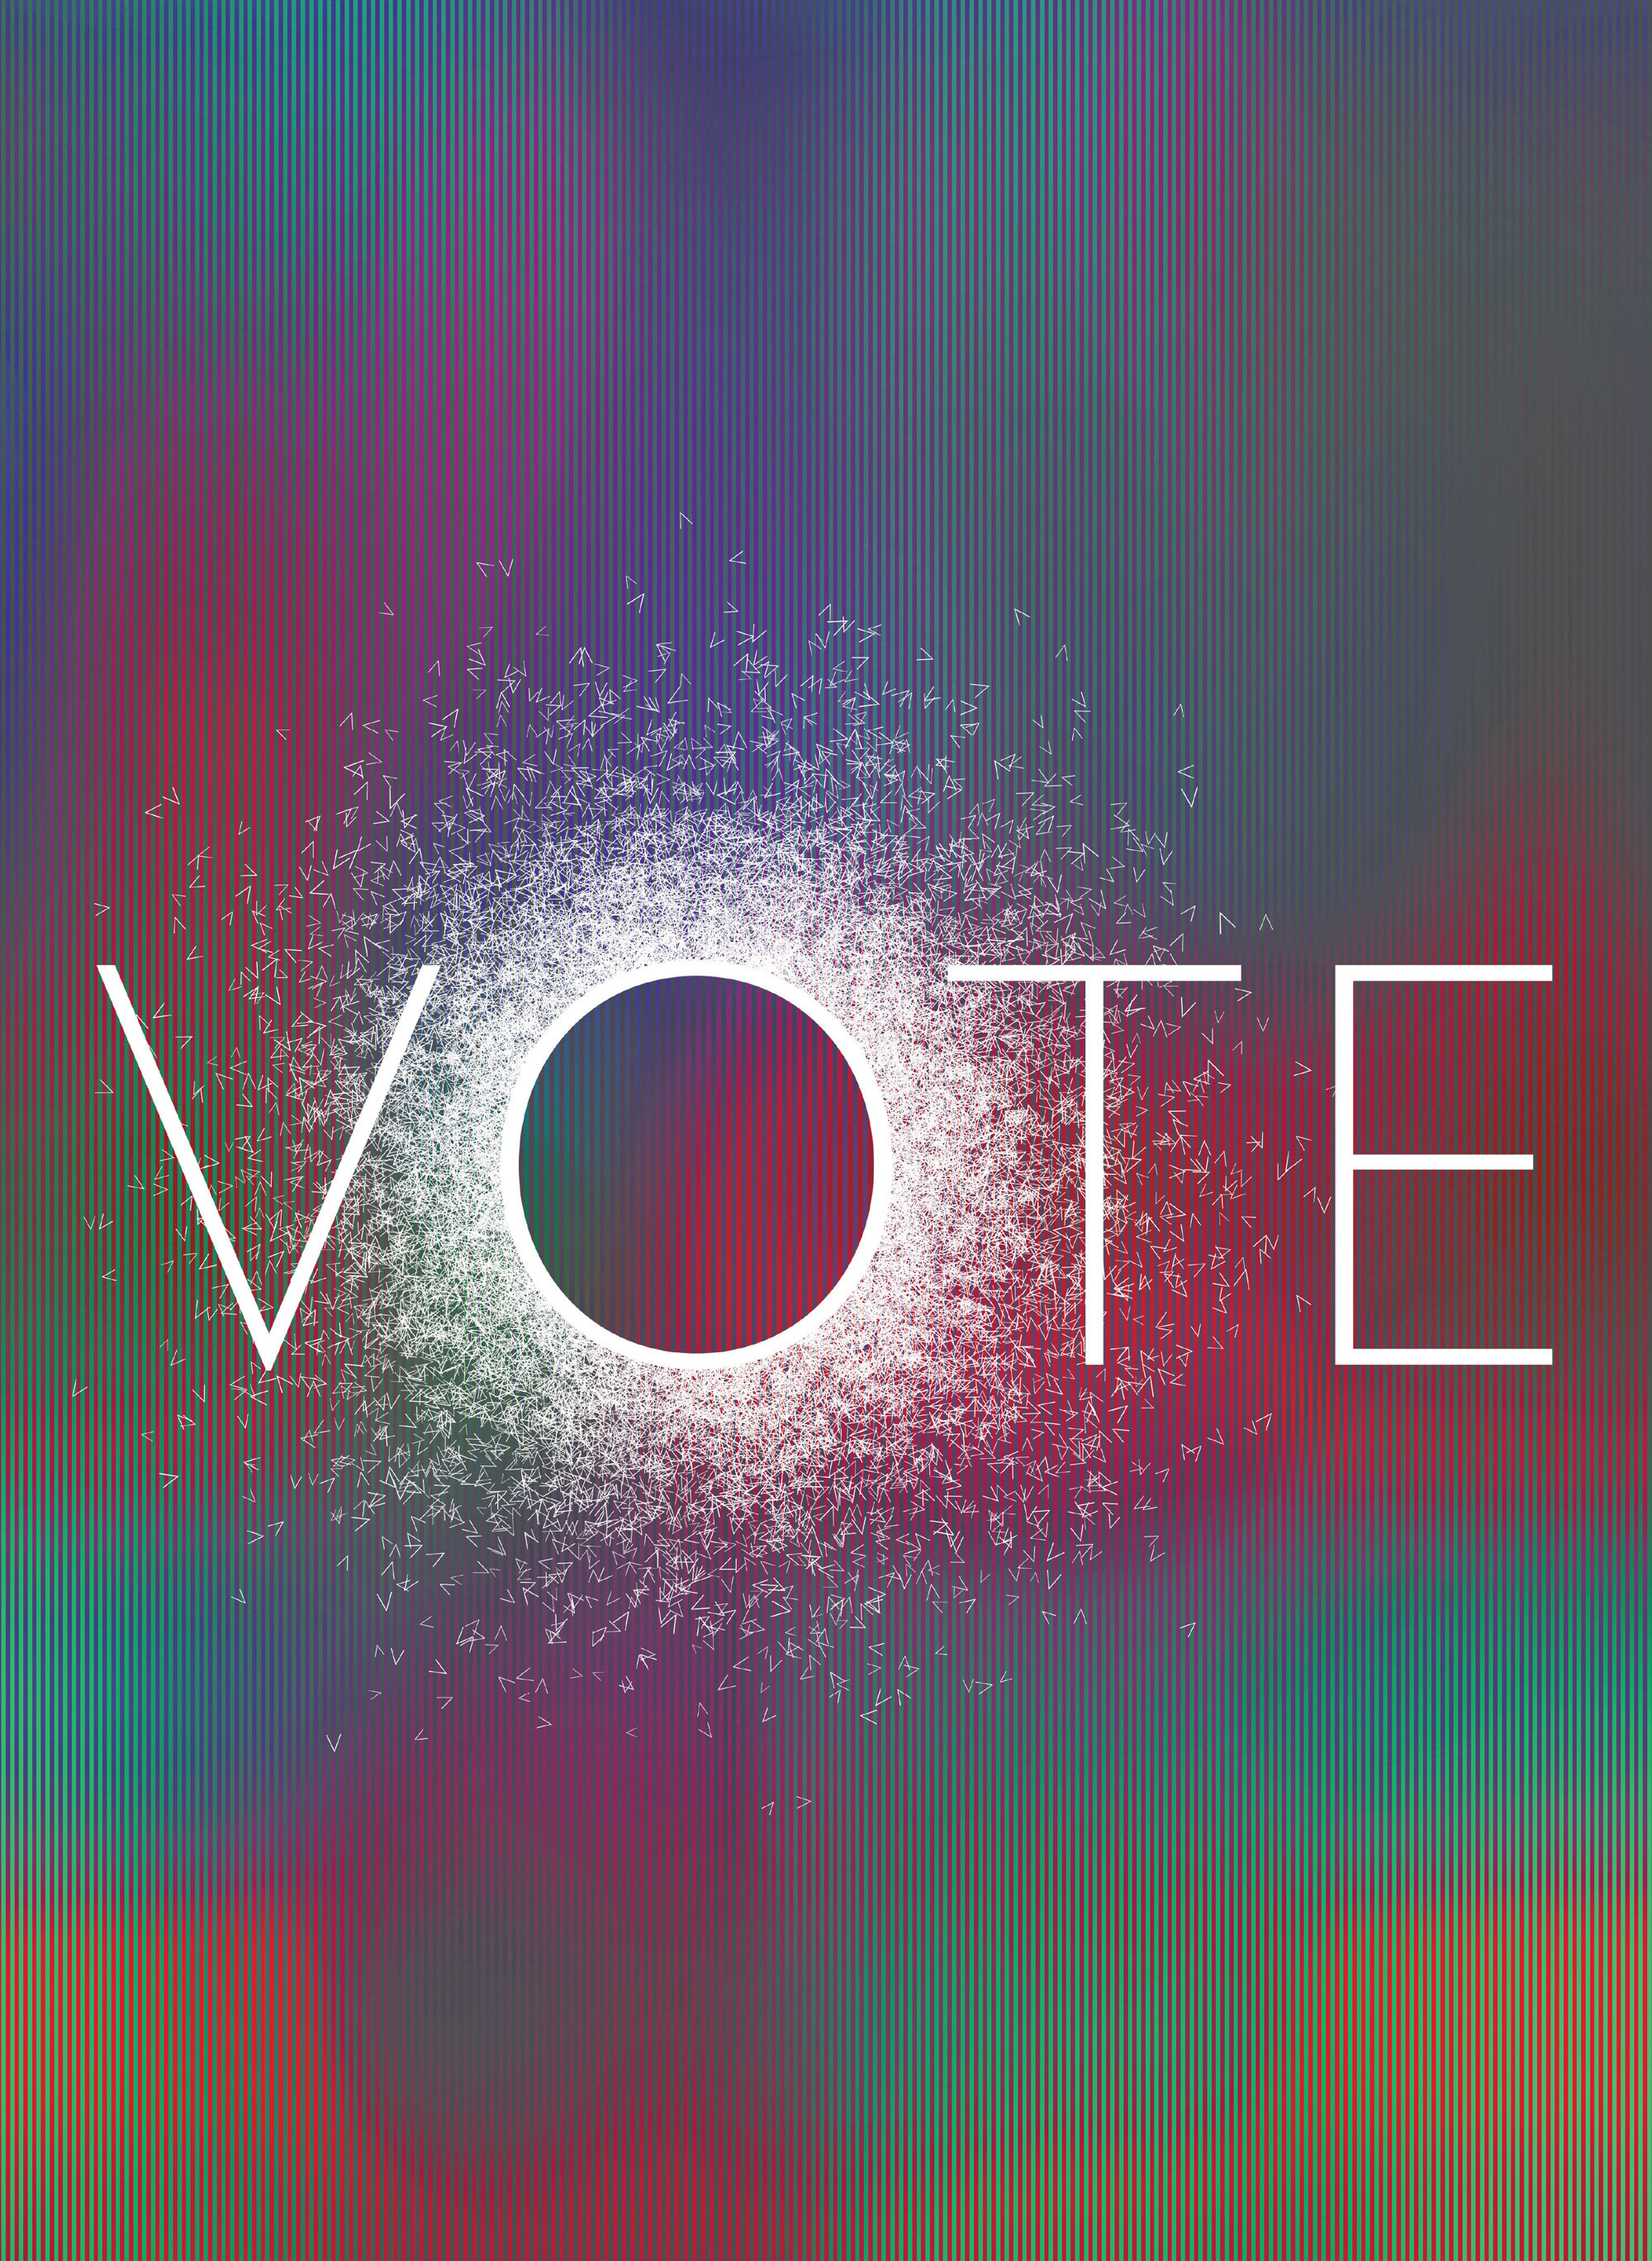 2000x2737 Voting merges all our voices